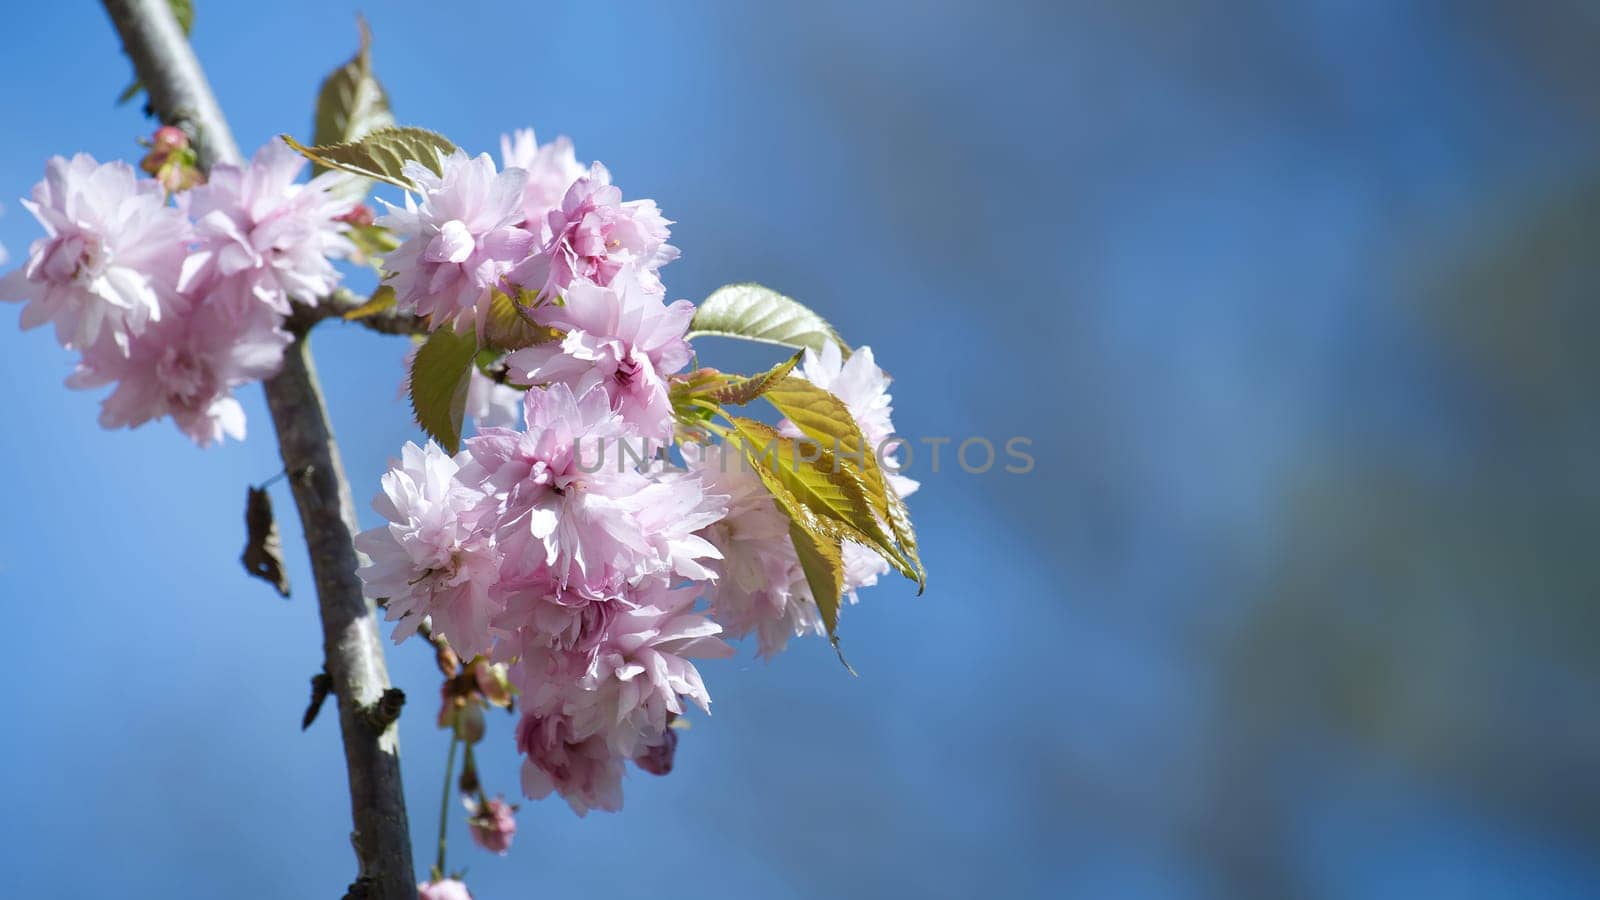 Sakura blooms on the branch create a vivid pink flower backdrop that contrasts with the serene sky above, evoking a feeling of vibrancy and vigor